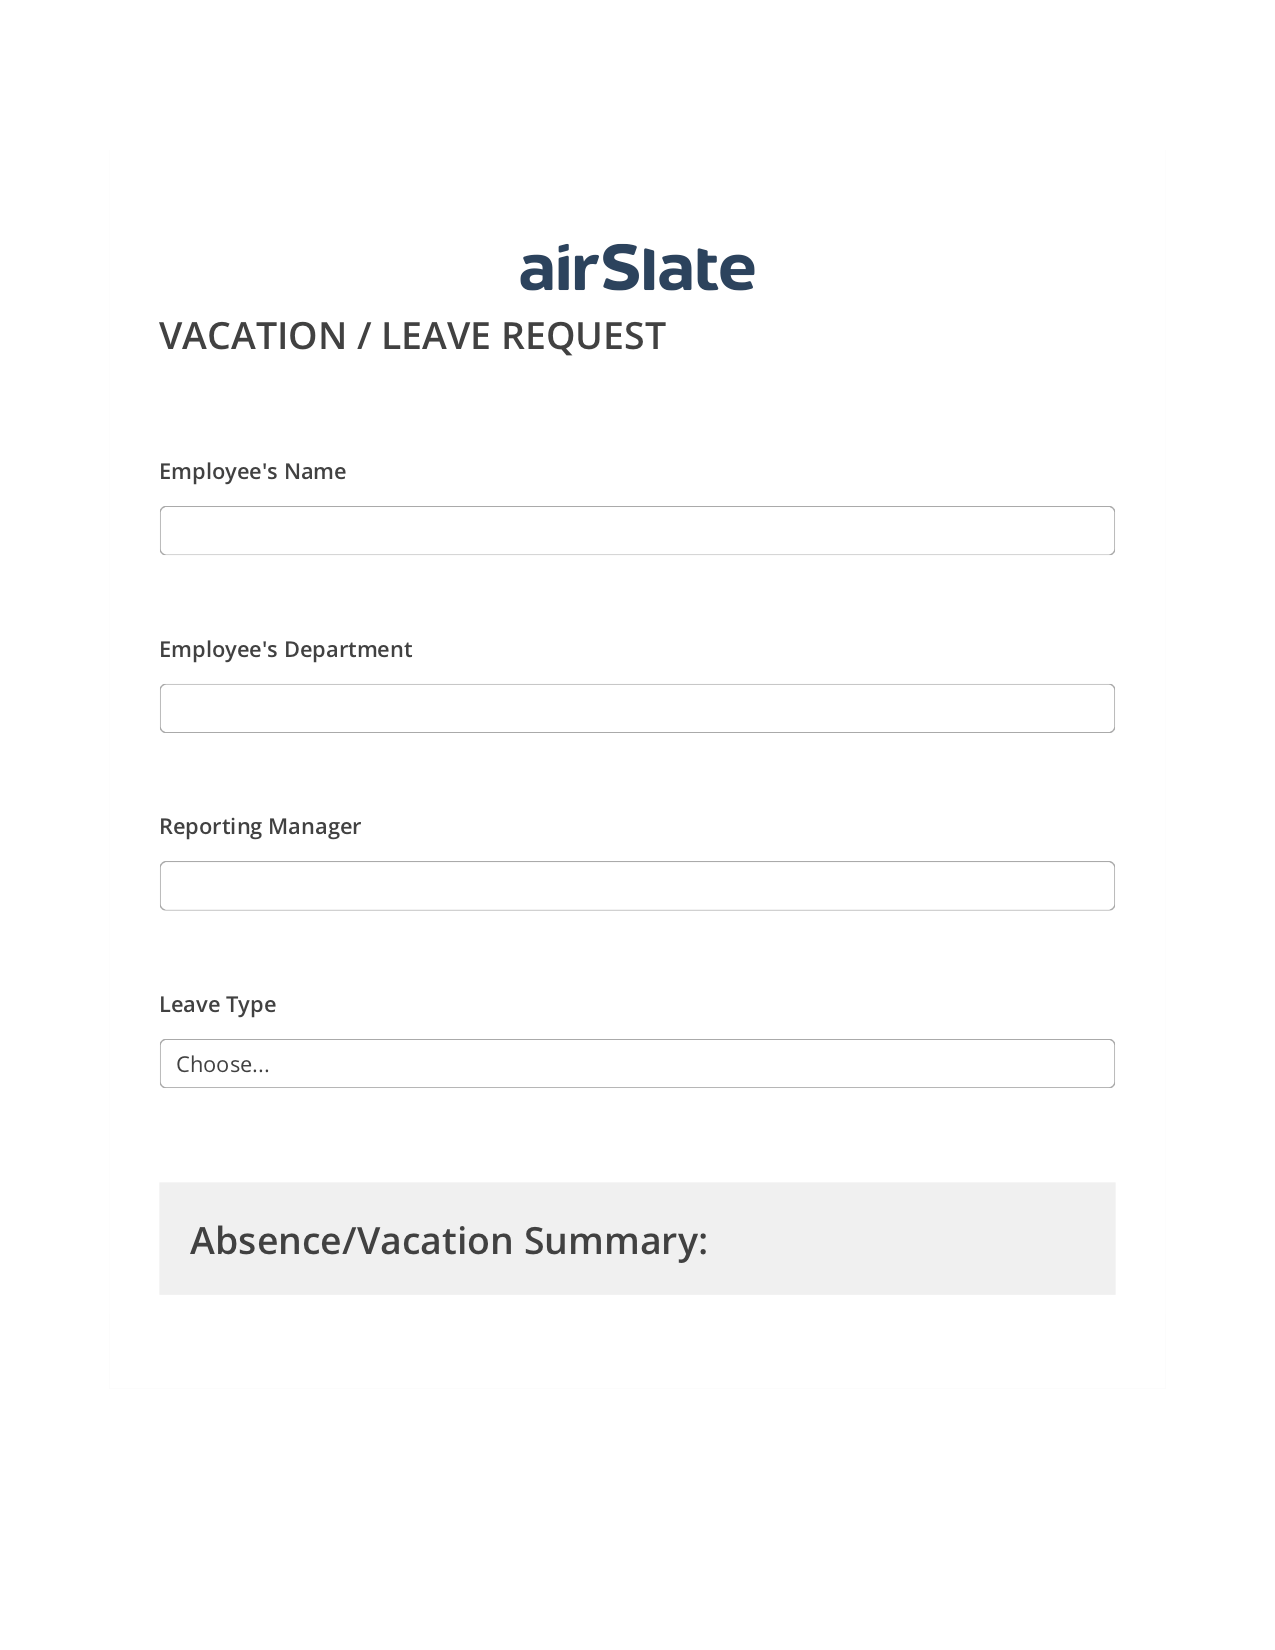 Vacation/Leave Request Workflow Pre-fill from CSV File Bot, Send a Slate with Roles Bot, Export to Smartsheet